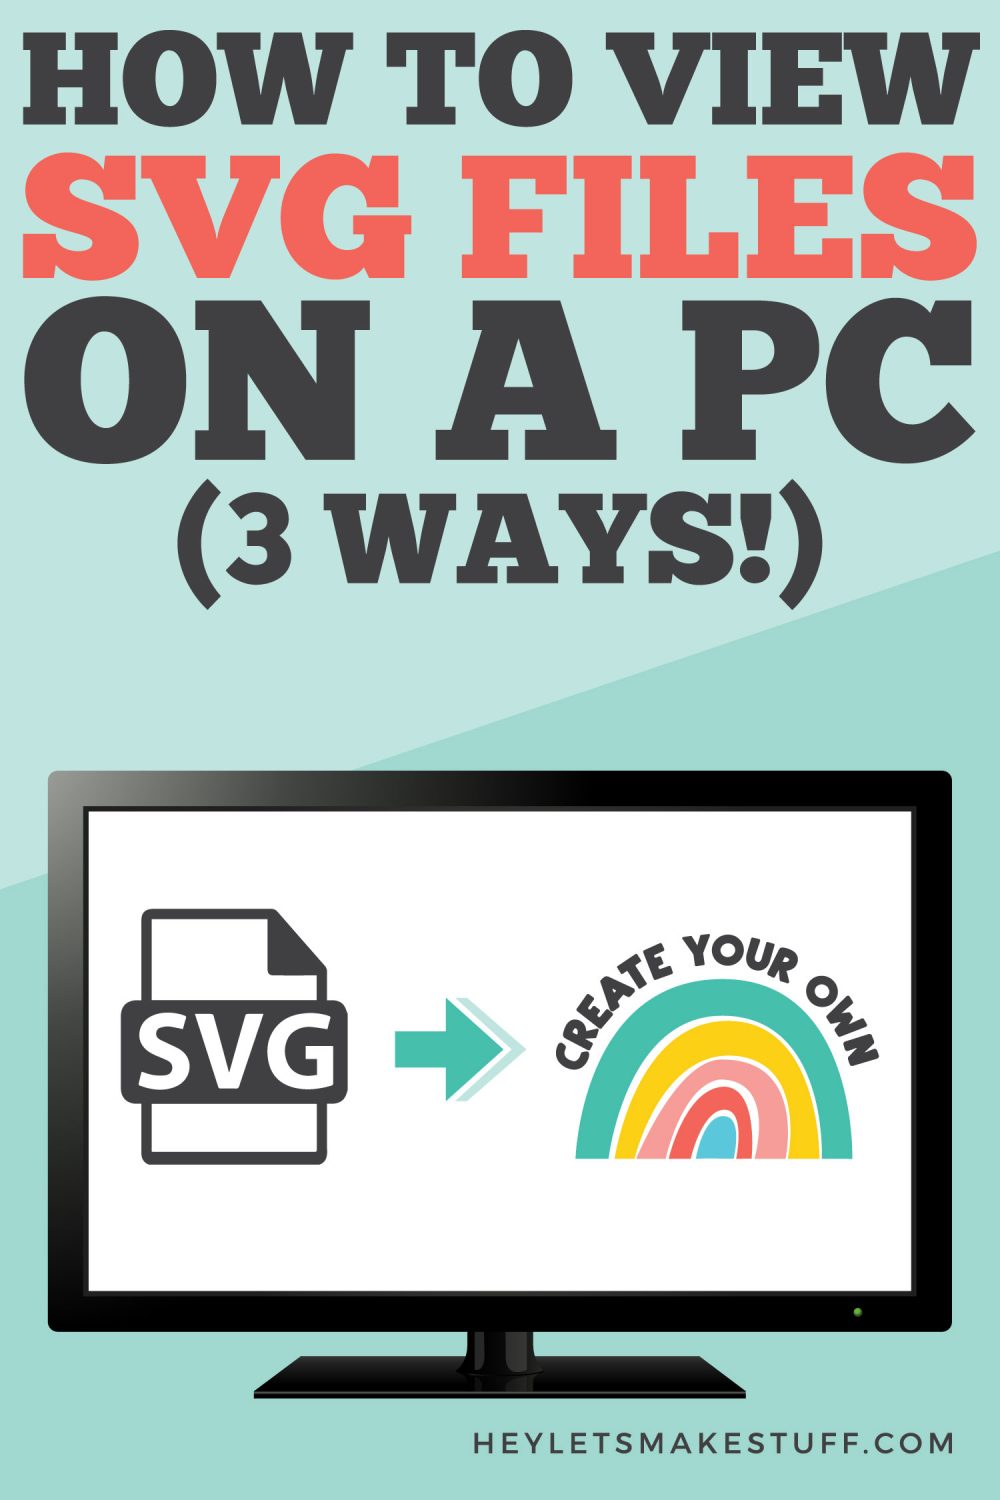 How to View SVG Files on a PC three ways pin image